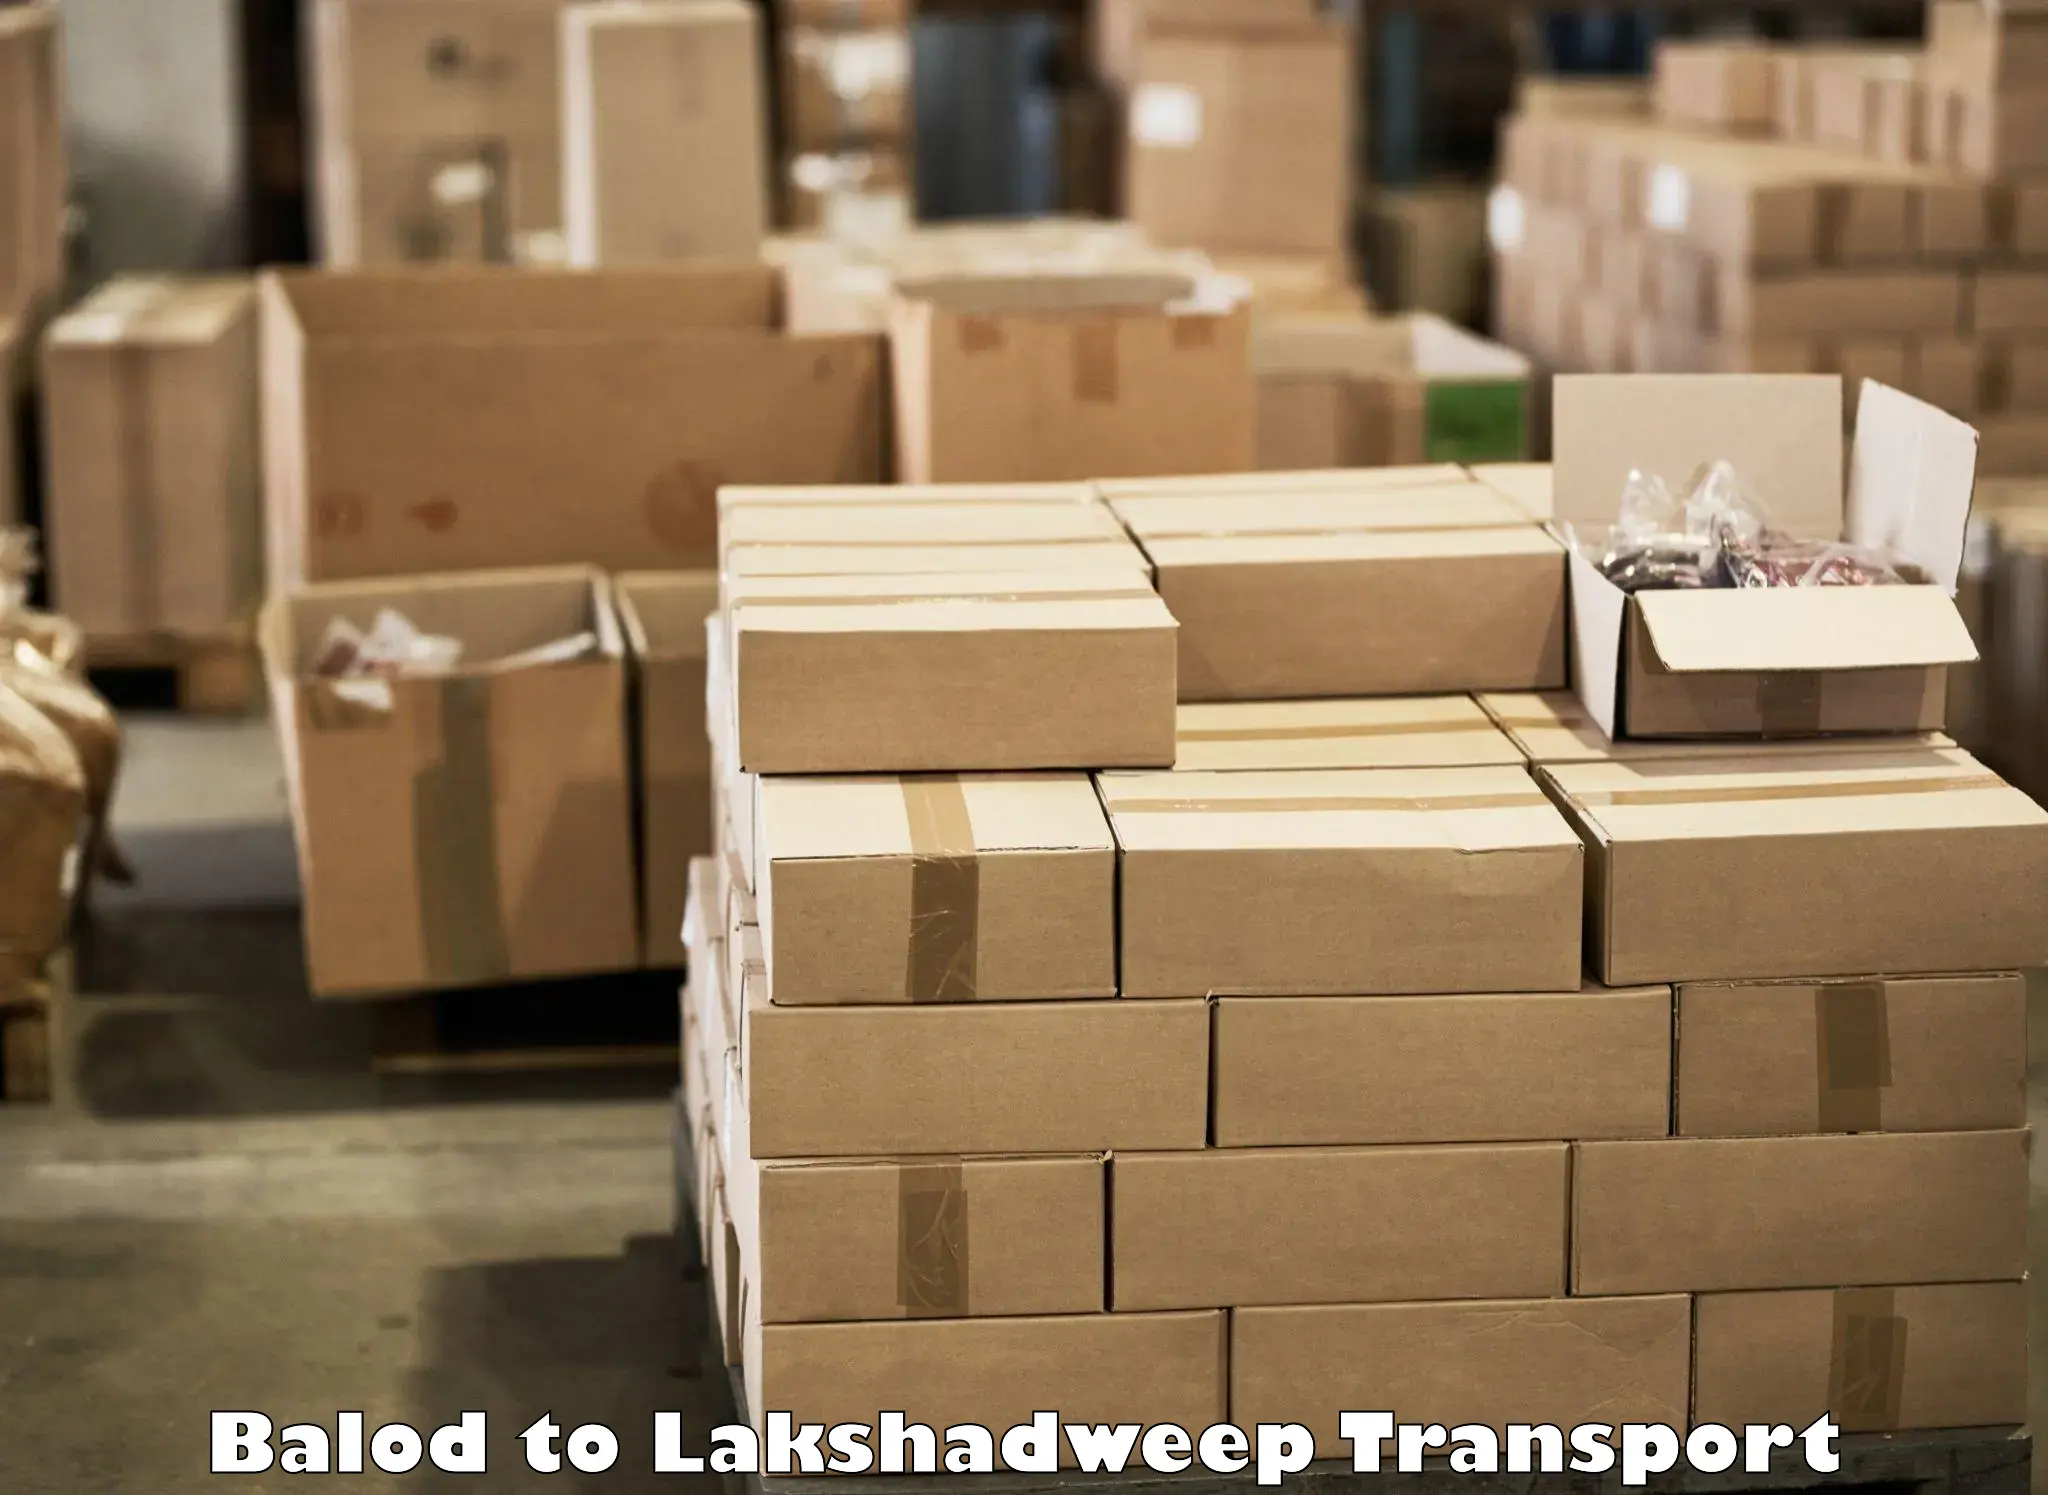 Delivery service Balod to Lakshadweep